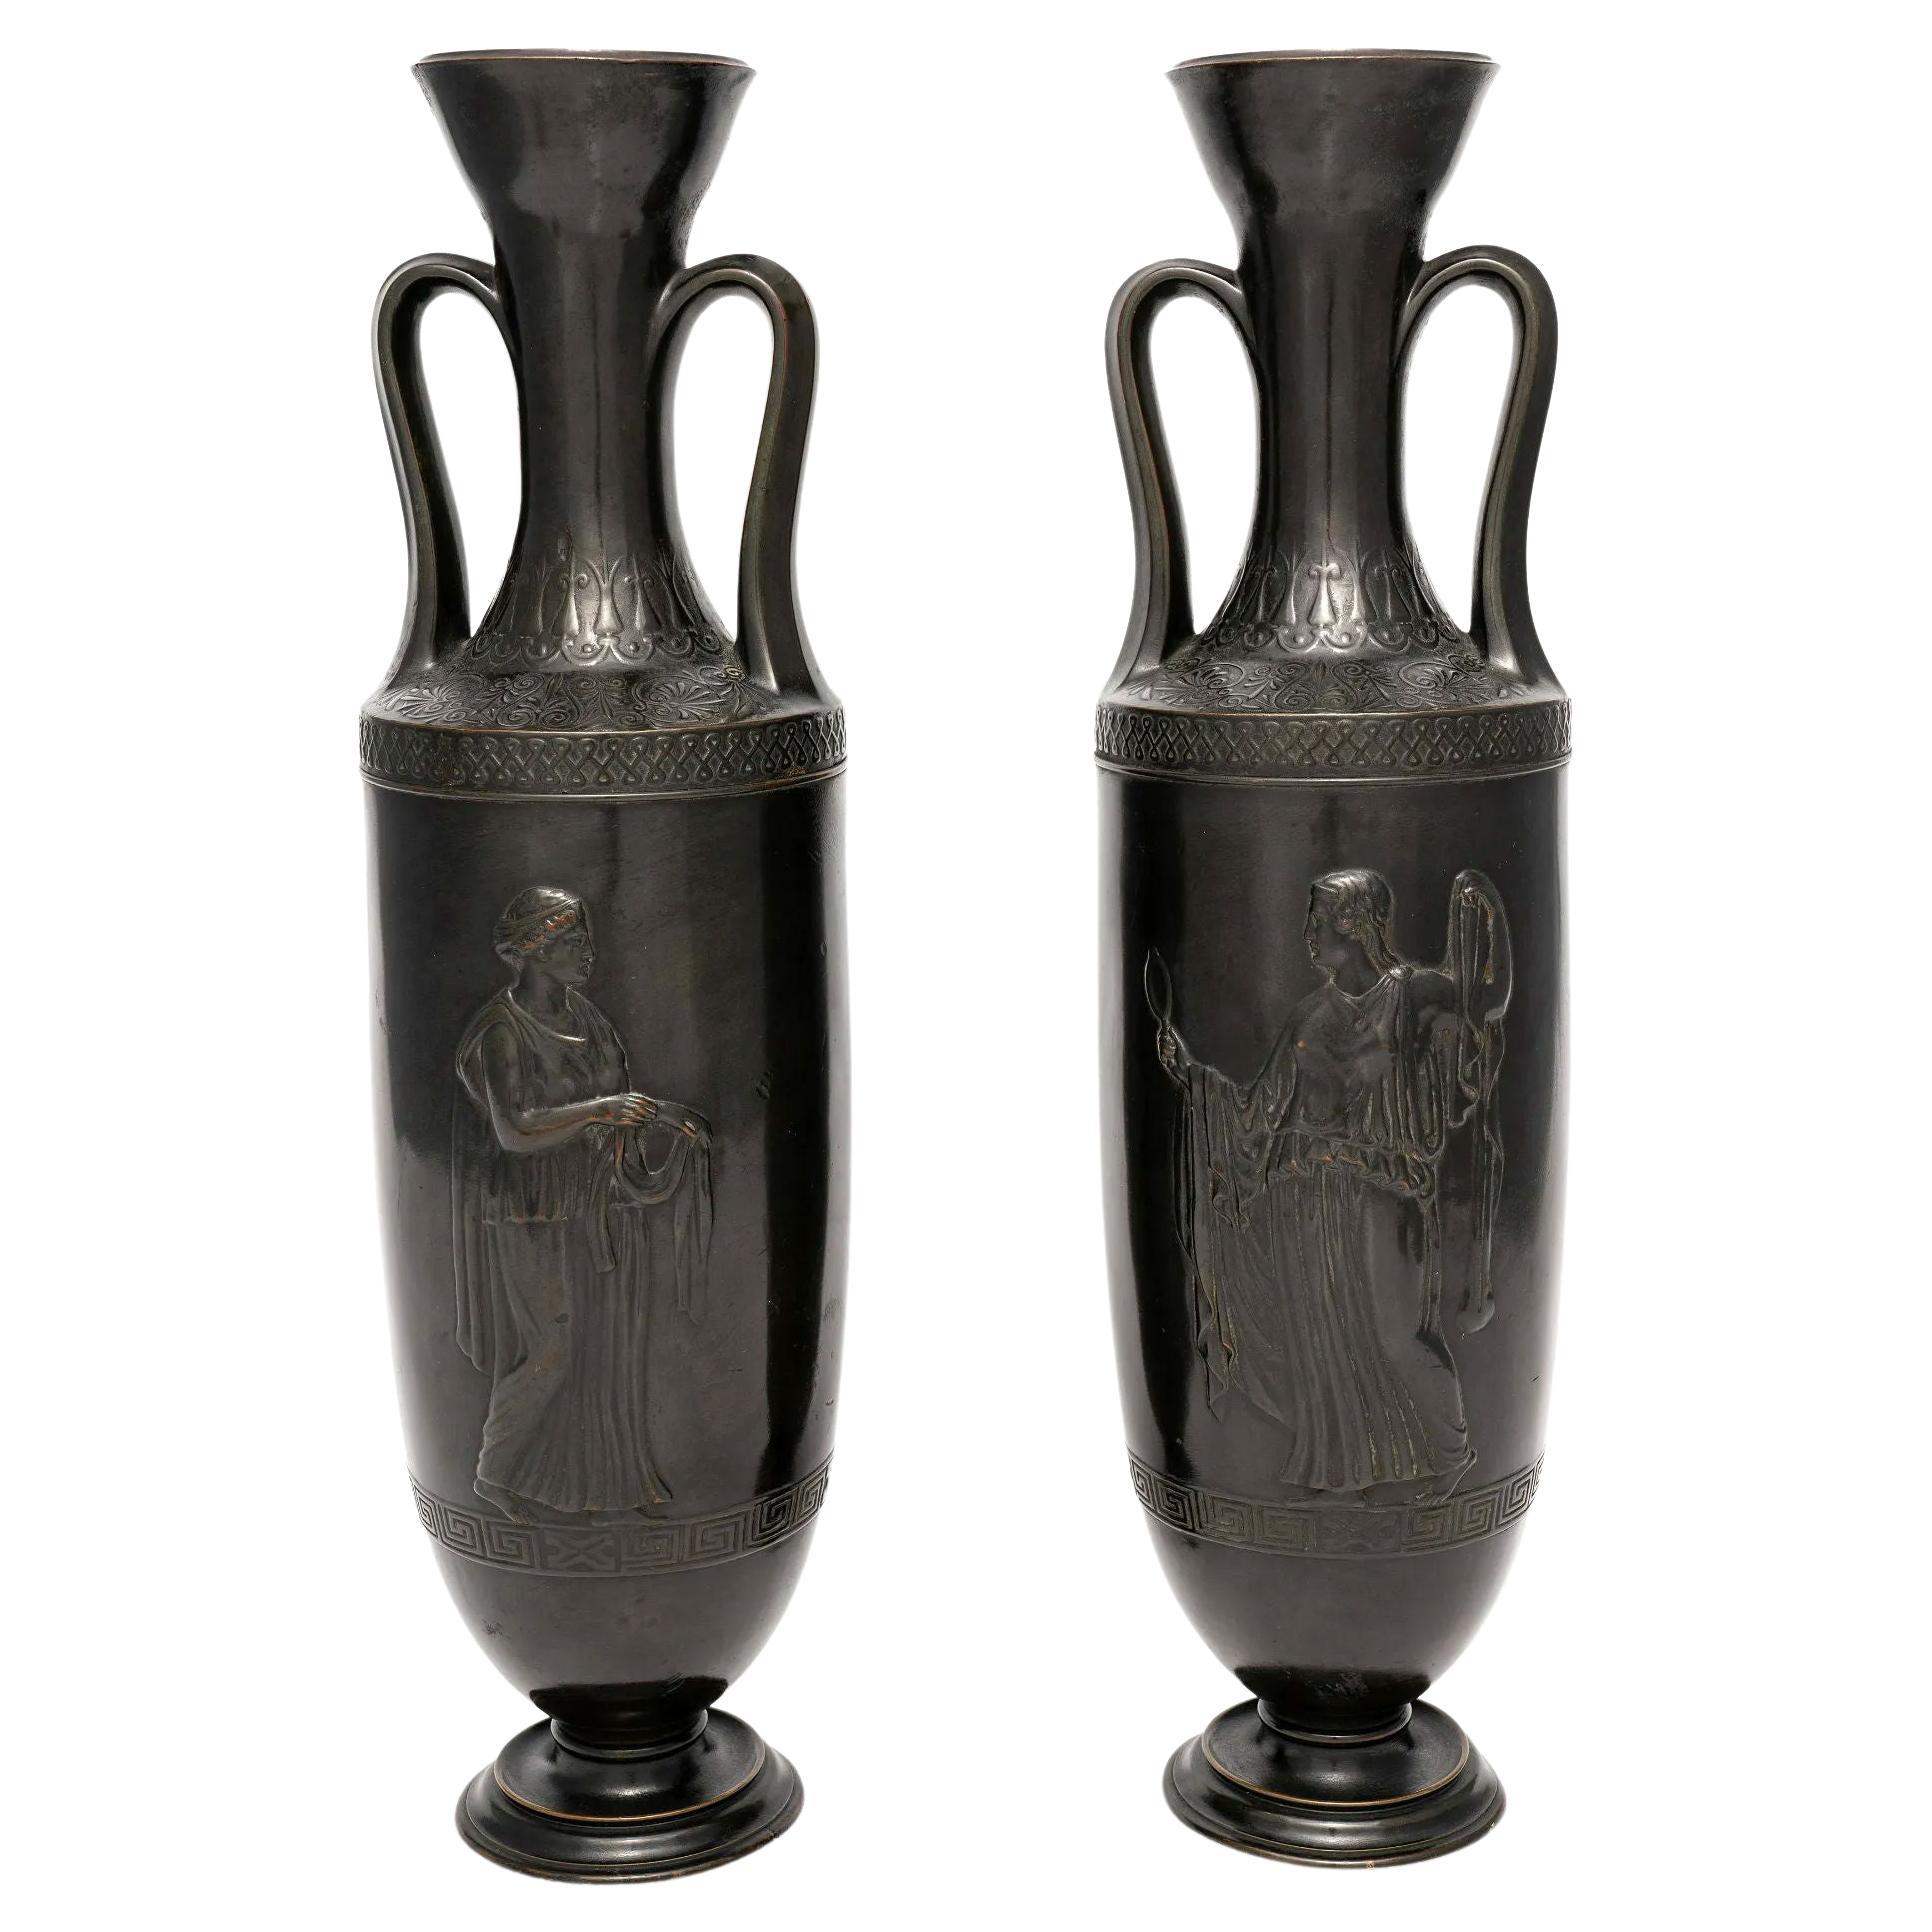 Pair of French 19th Century Greek Revival Neoclassical Patinated Bronze Vases